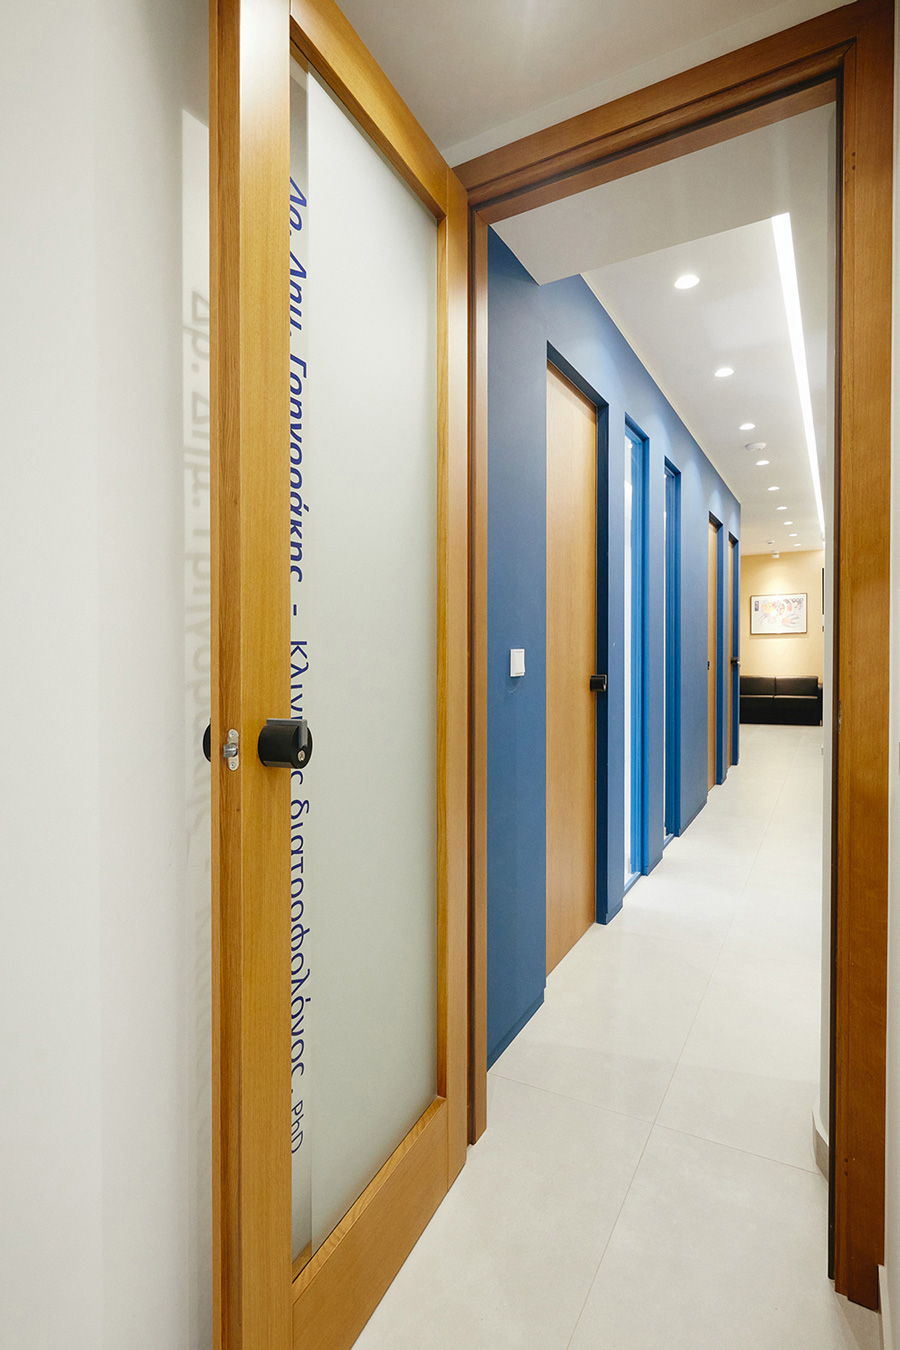 The accent blue wall has vertical windows and oak doors